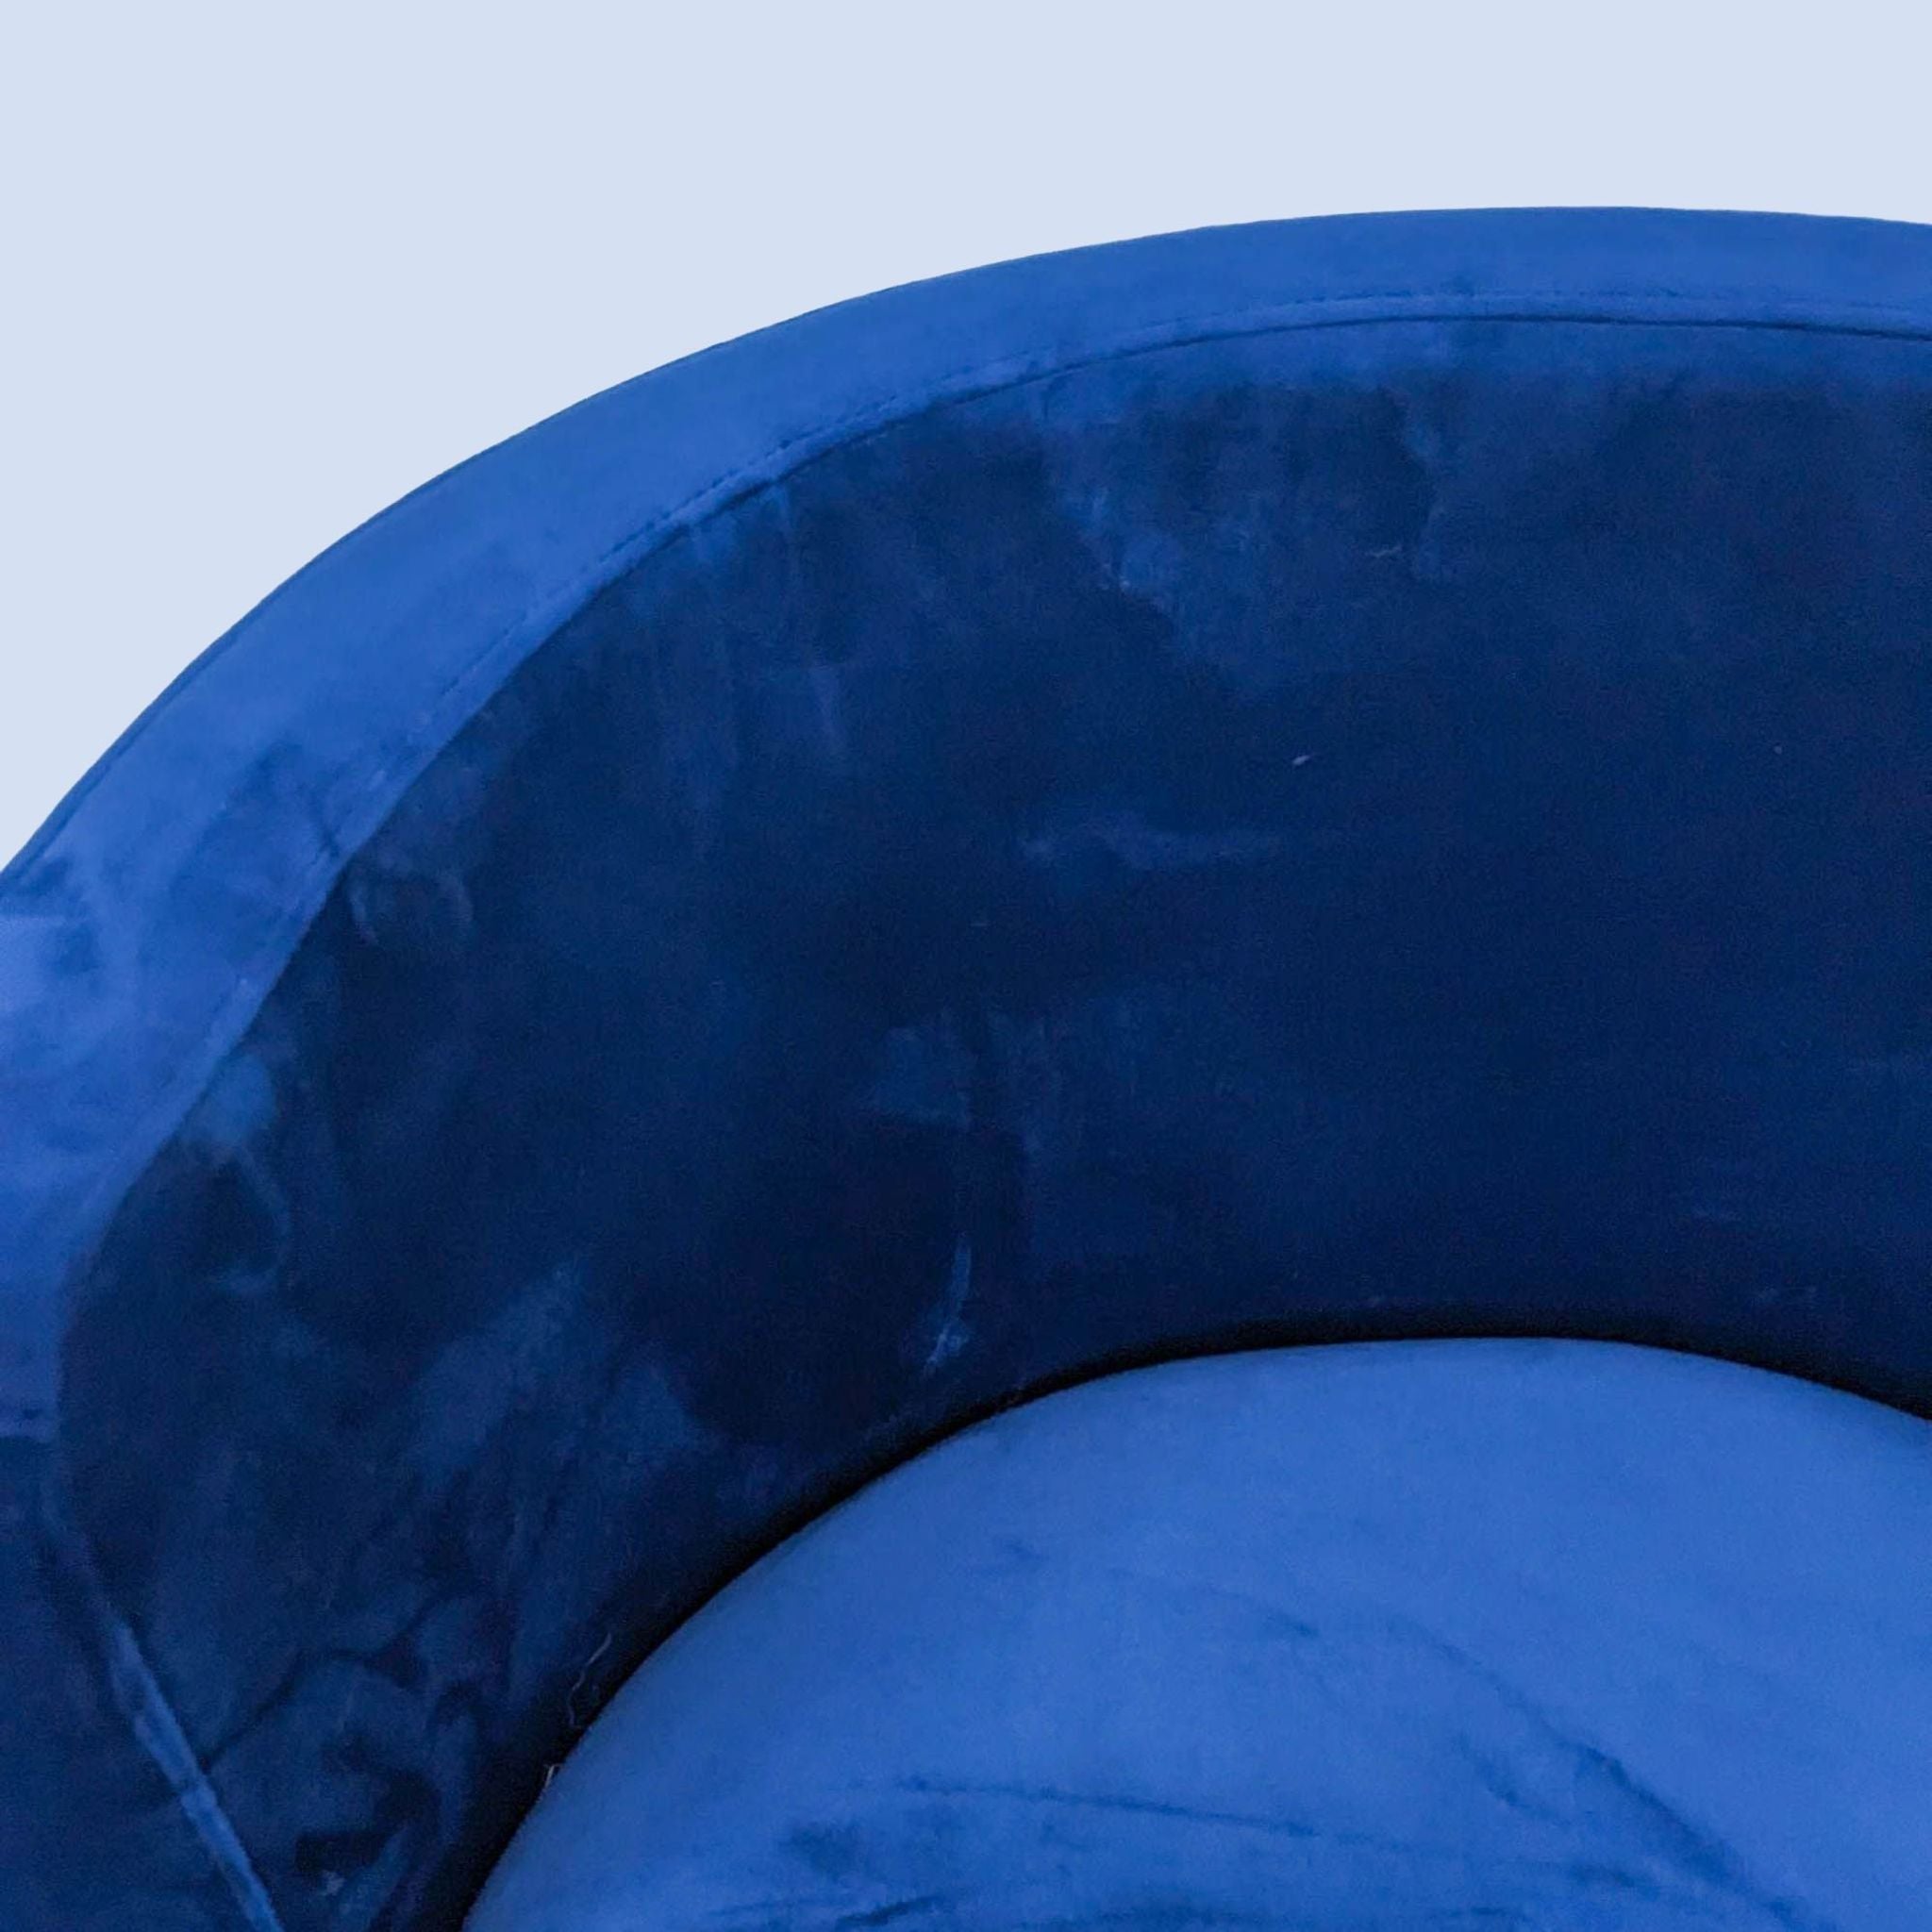 Close-up view of a navy blue velvet dining chair's rounded backrest, highlighting the rich texture and color.